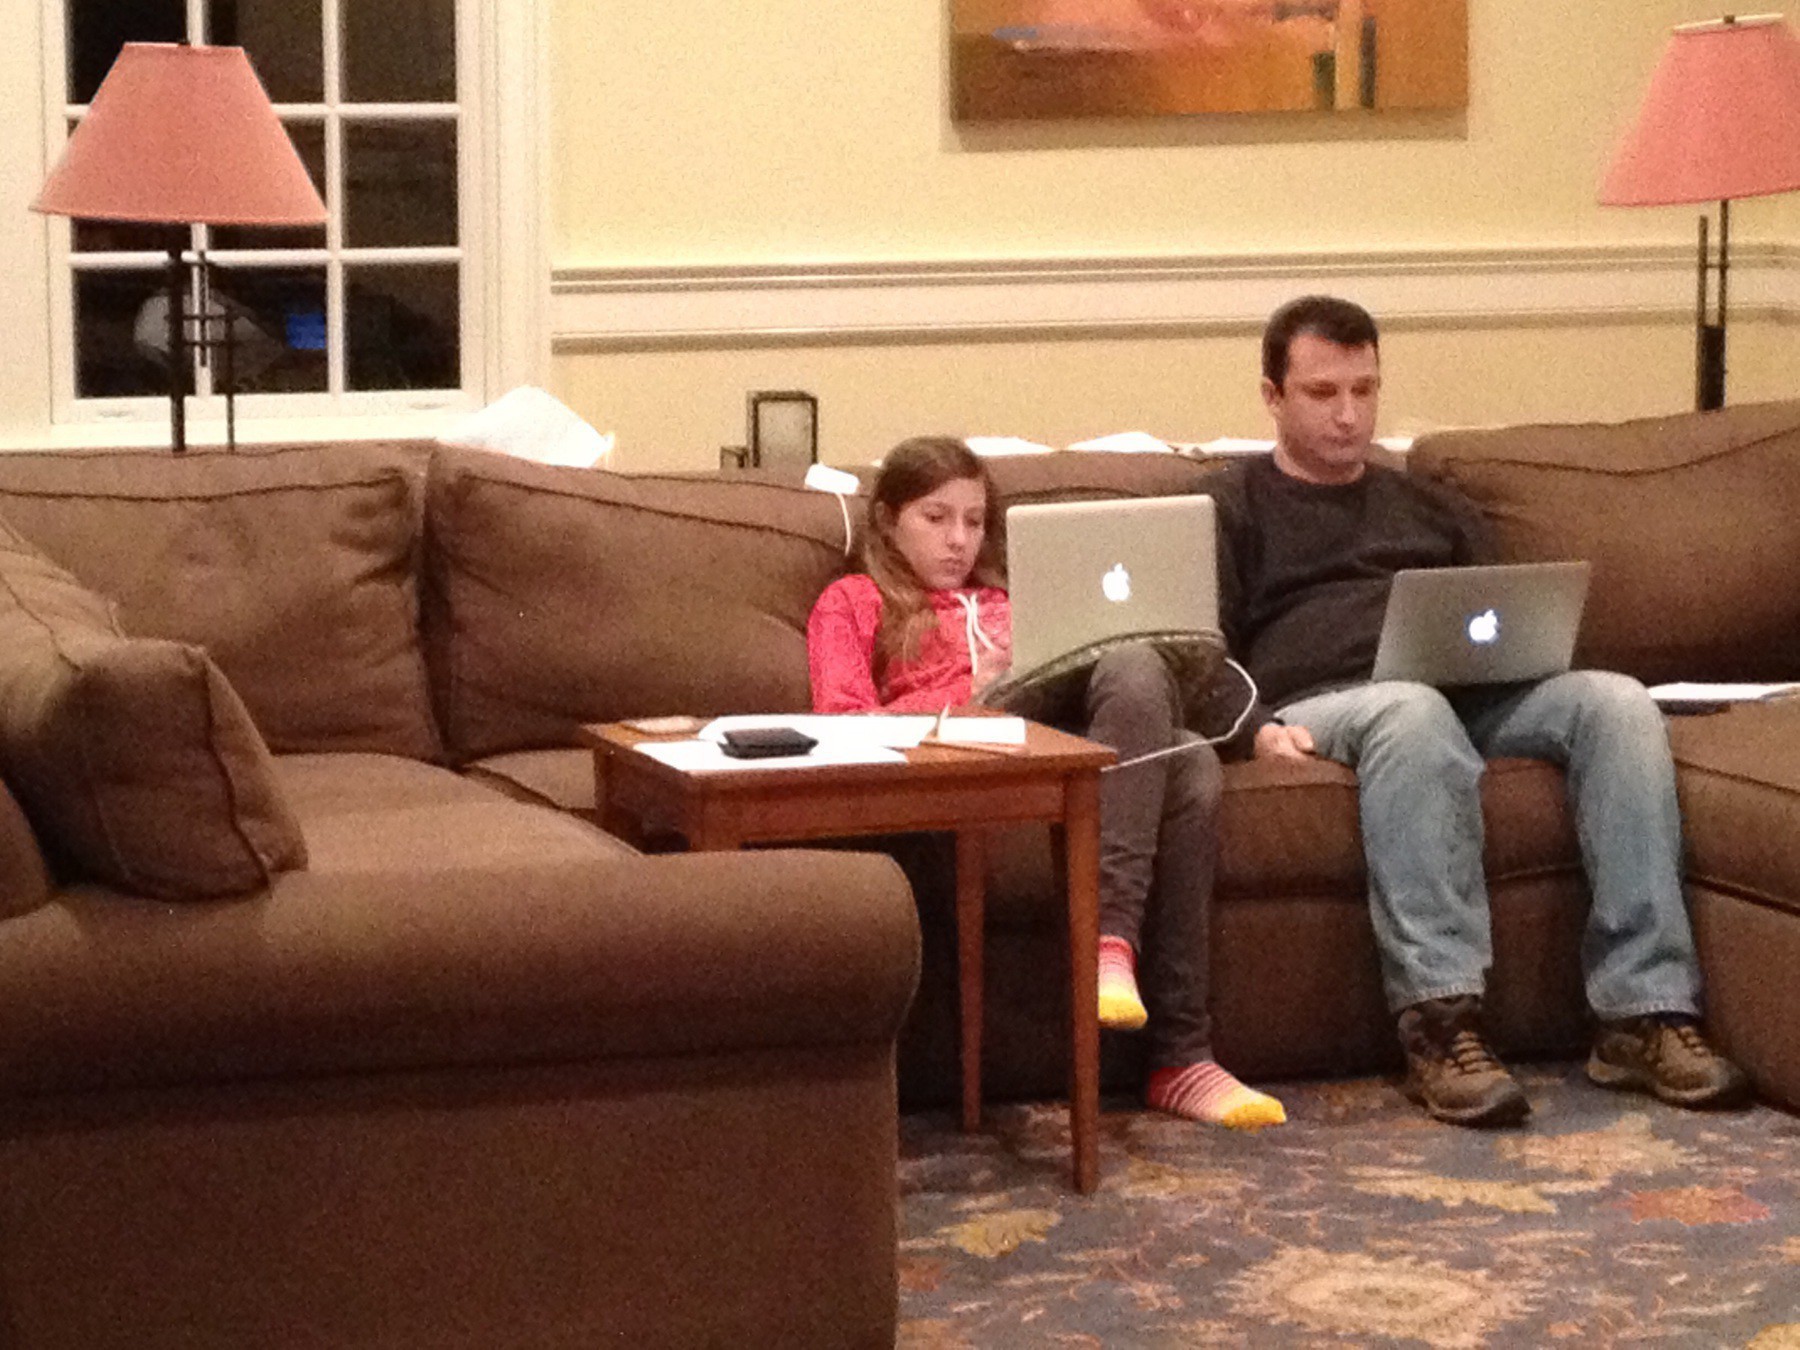 Father and daughter sitting next to each other on a couch. They are both completely focused on their laptops.